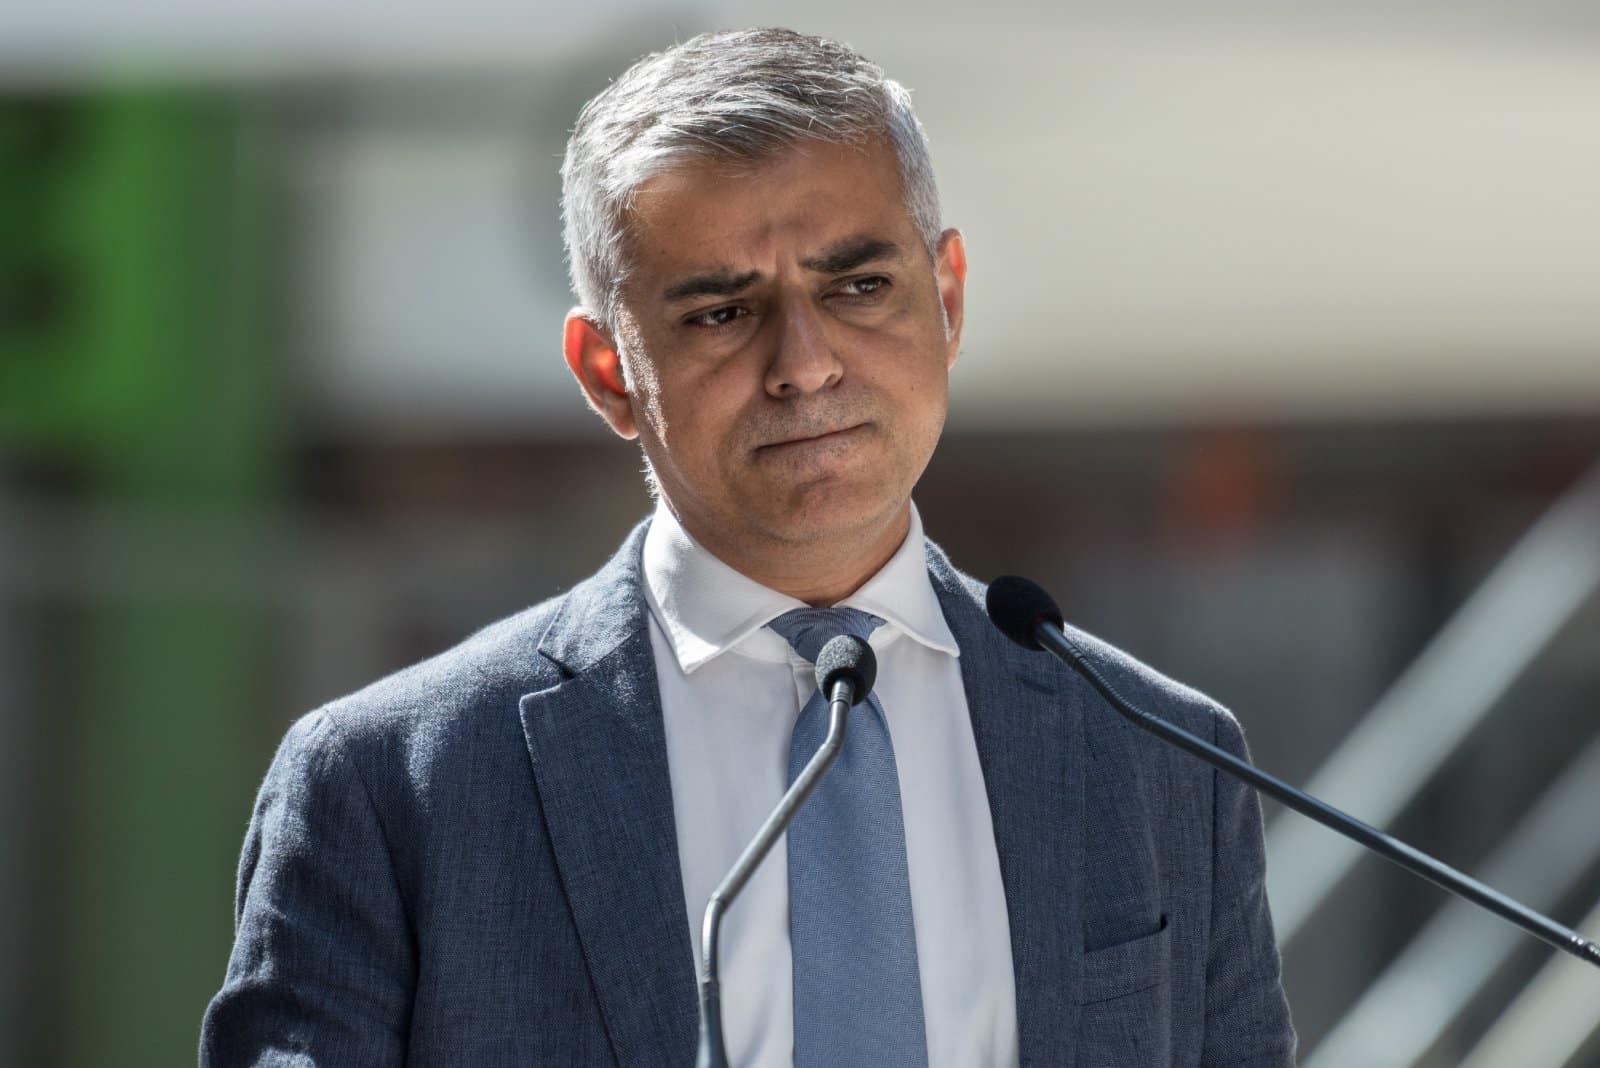 Image Credit: Shutterstock / Frederic Legrand – COMEO <p><span>Mayor of London Sadiq Khan argued that the comments made by Anderson about him were “Islamophobic, anti-Muslim and racist.”</span></p>